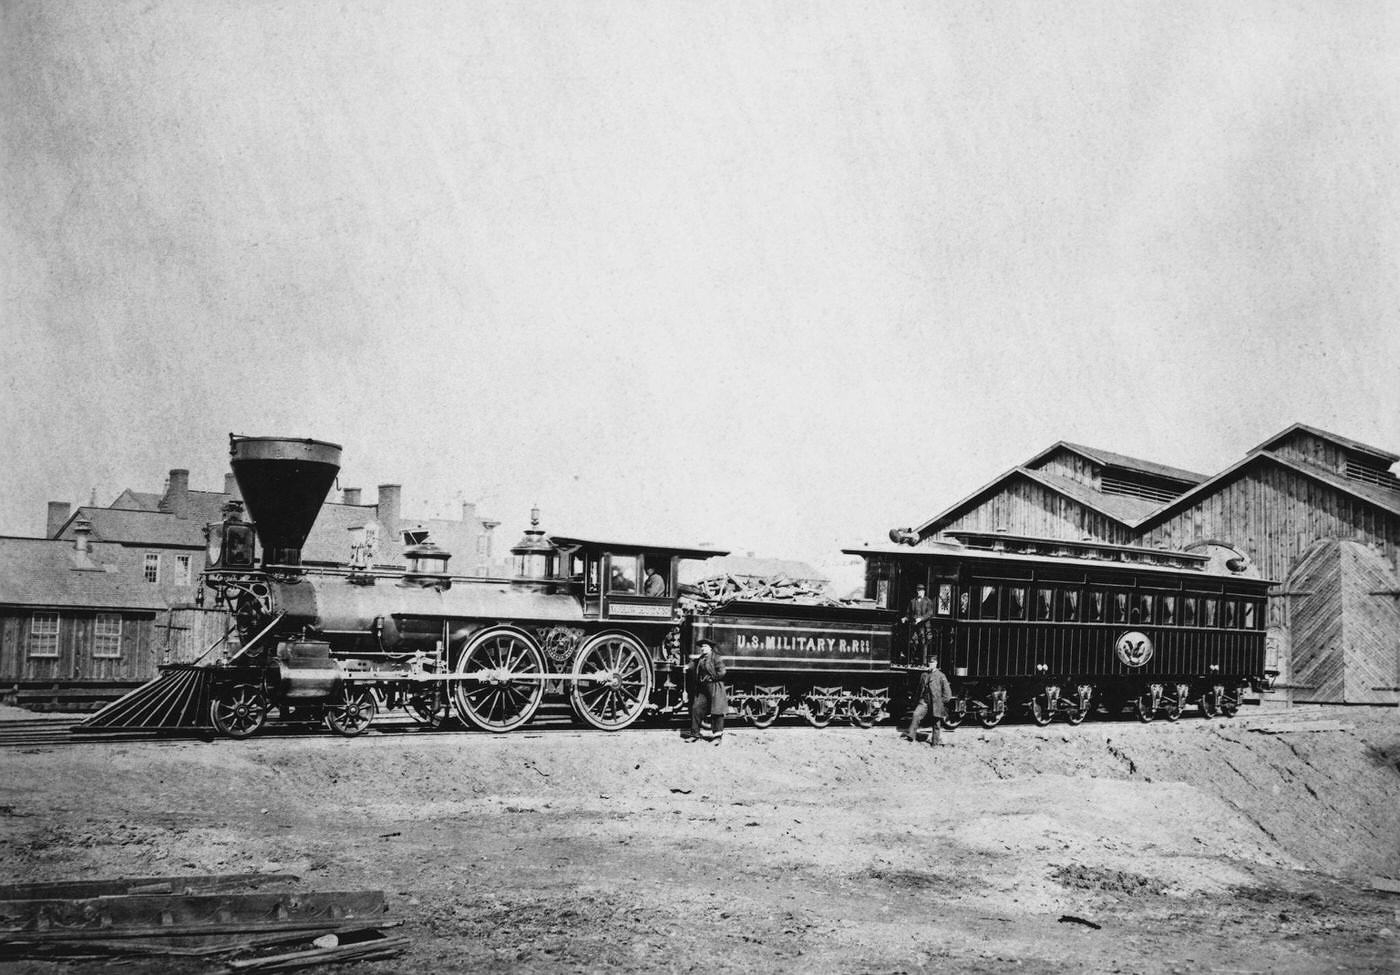 The train carrying President Abraham Lincoln's casket during his funeral remains idle at the station, Washington, D.C., 1860s